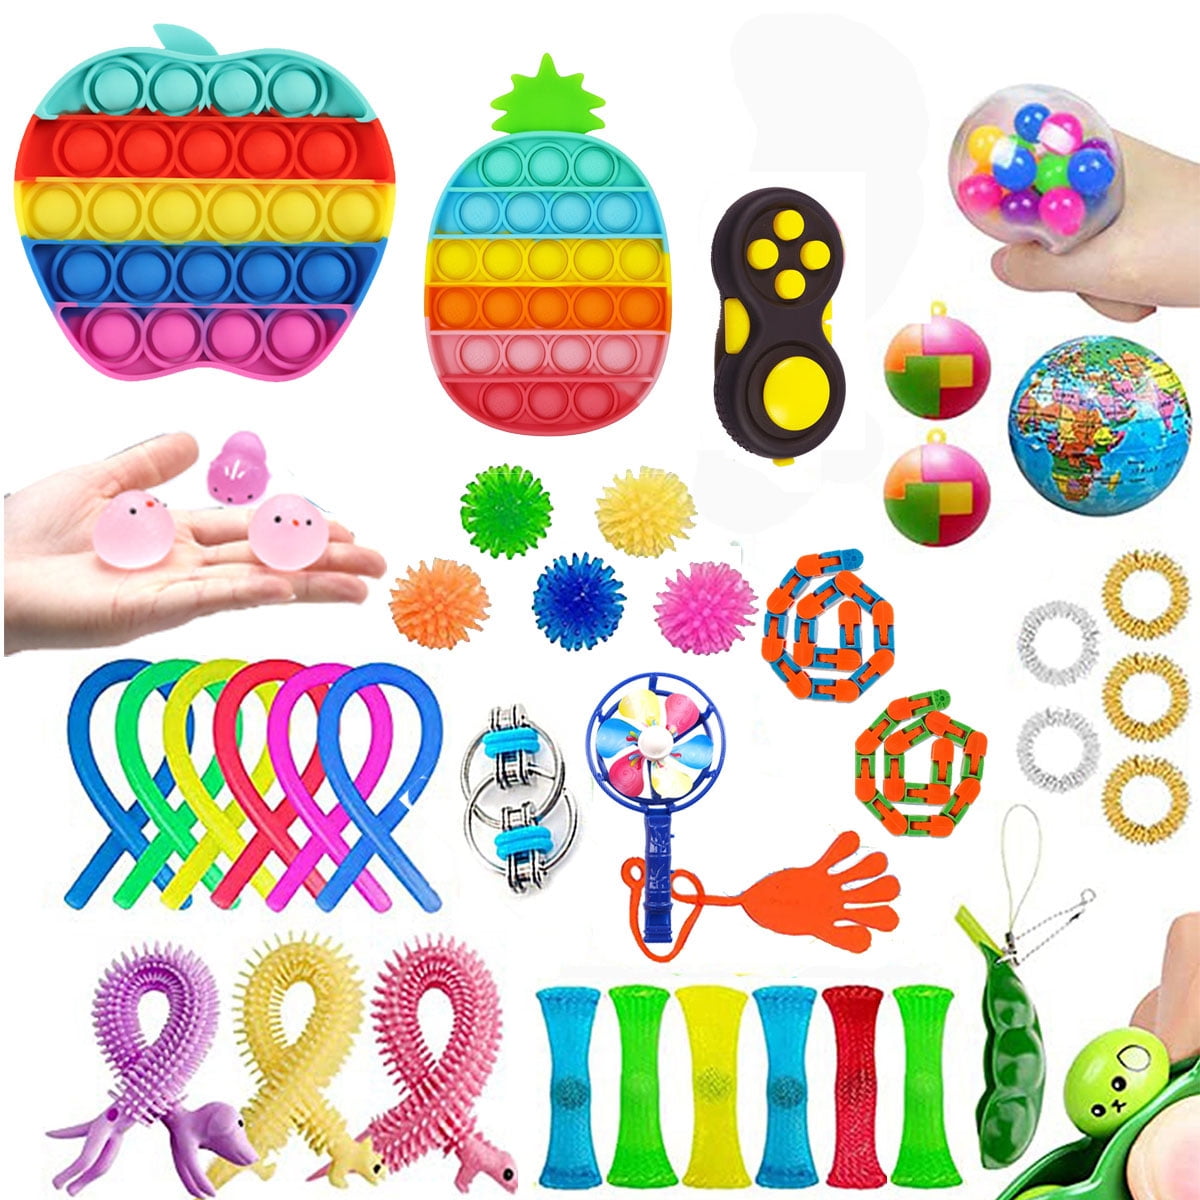 Details about   Fidget Sensory Toys Set 22 Pack For Stress Relief Anti-Anxiety Stocking Stuffer* 